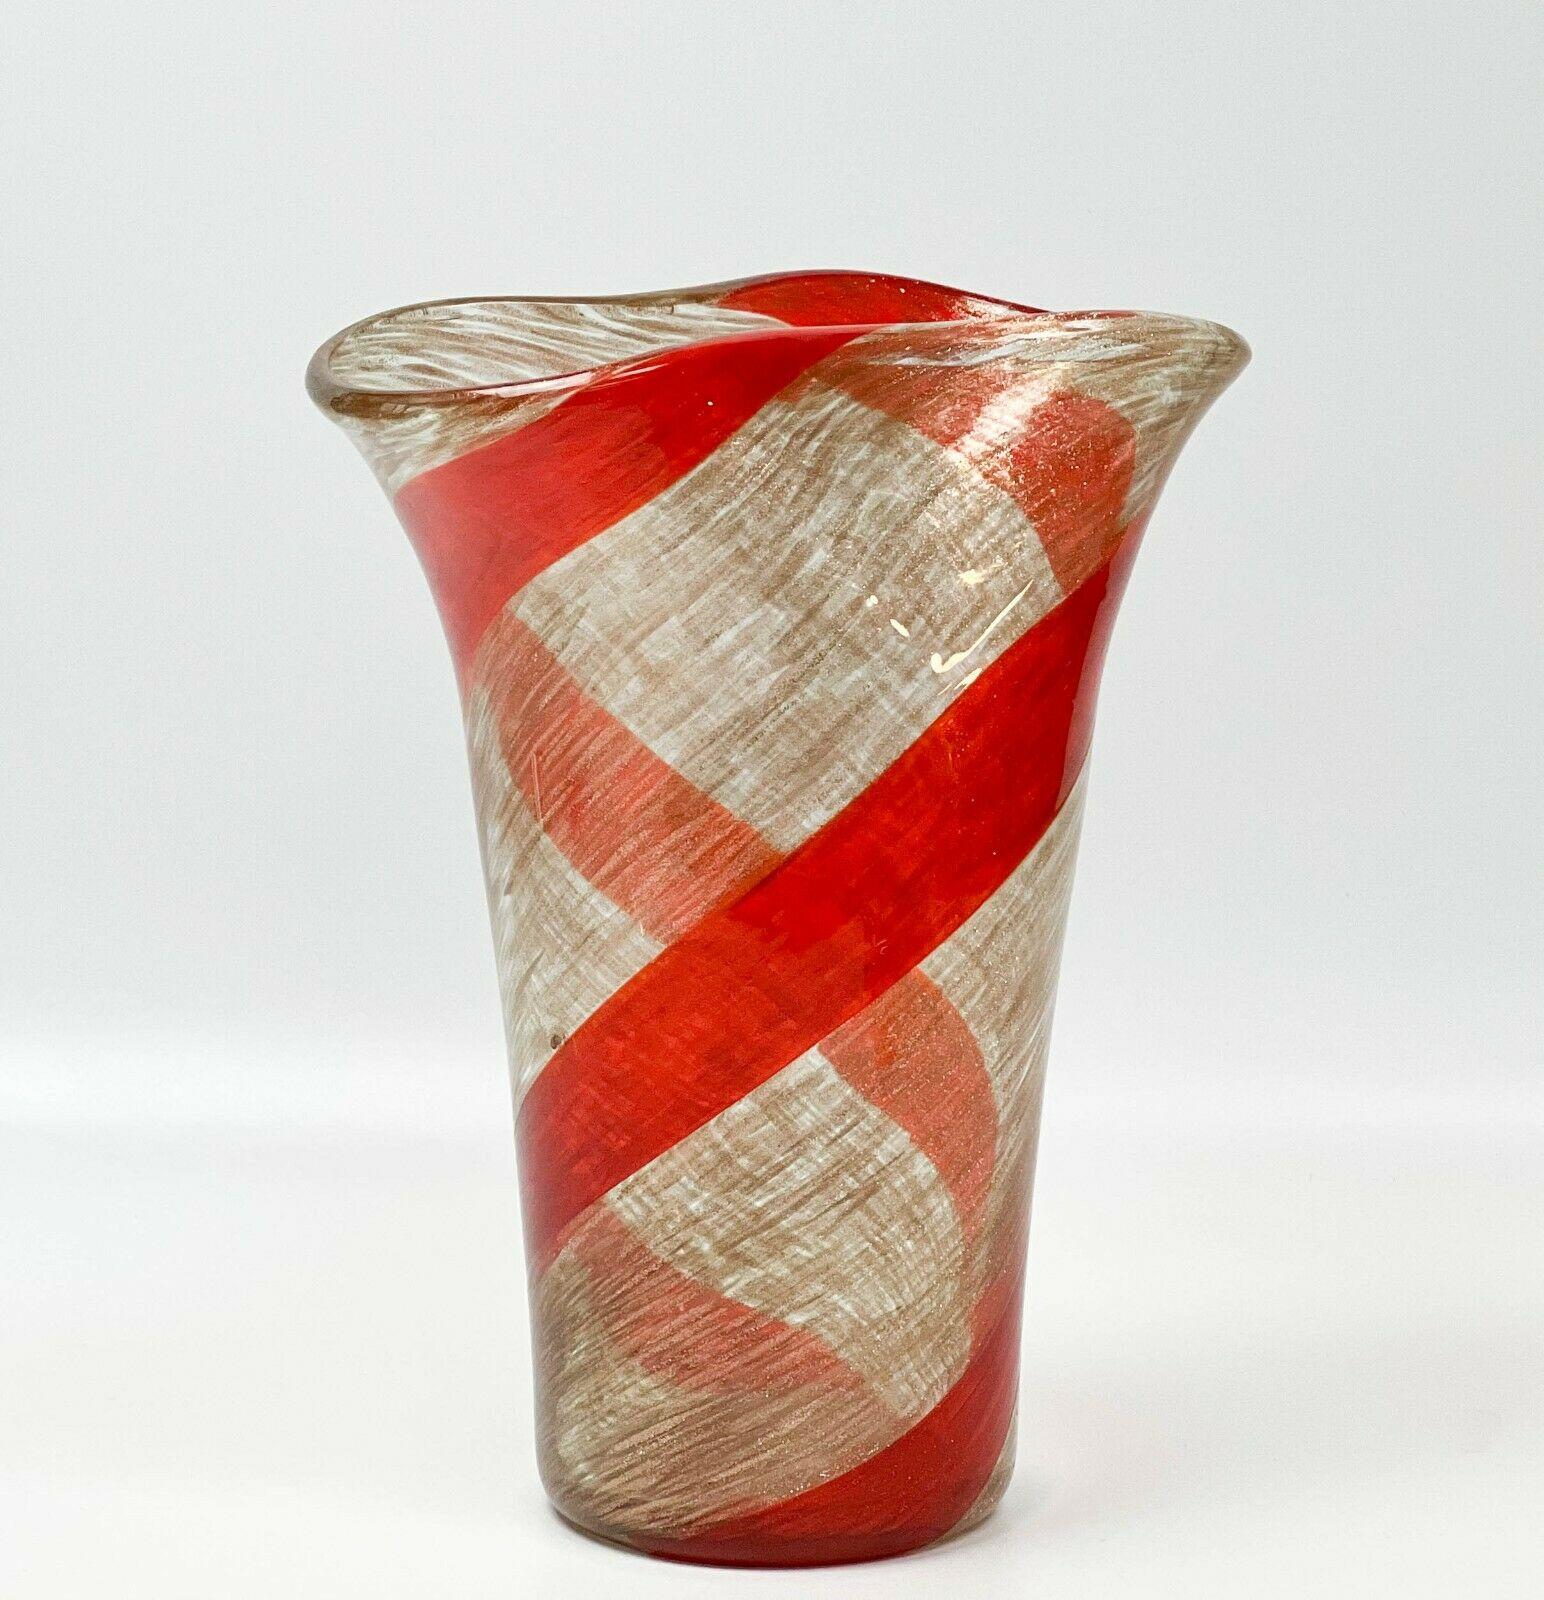 Fratelli Toso Italian Murano Art Glass vase

Vase with Aventurine glass and a red ribbon design with a curved rim. Murano label to the underside.

Additional Information:
Country/Region of Manufacture: Italy 
Material: Glass
Production Style: